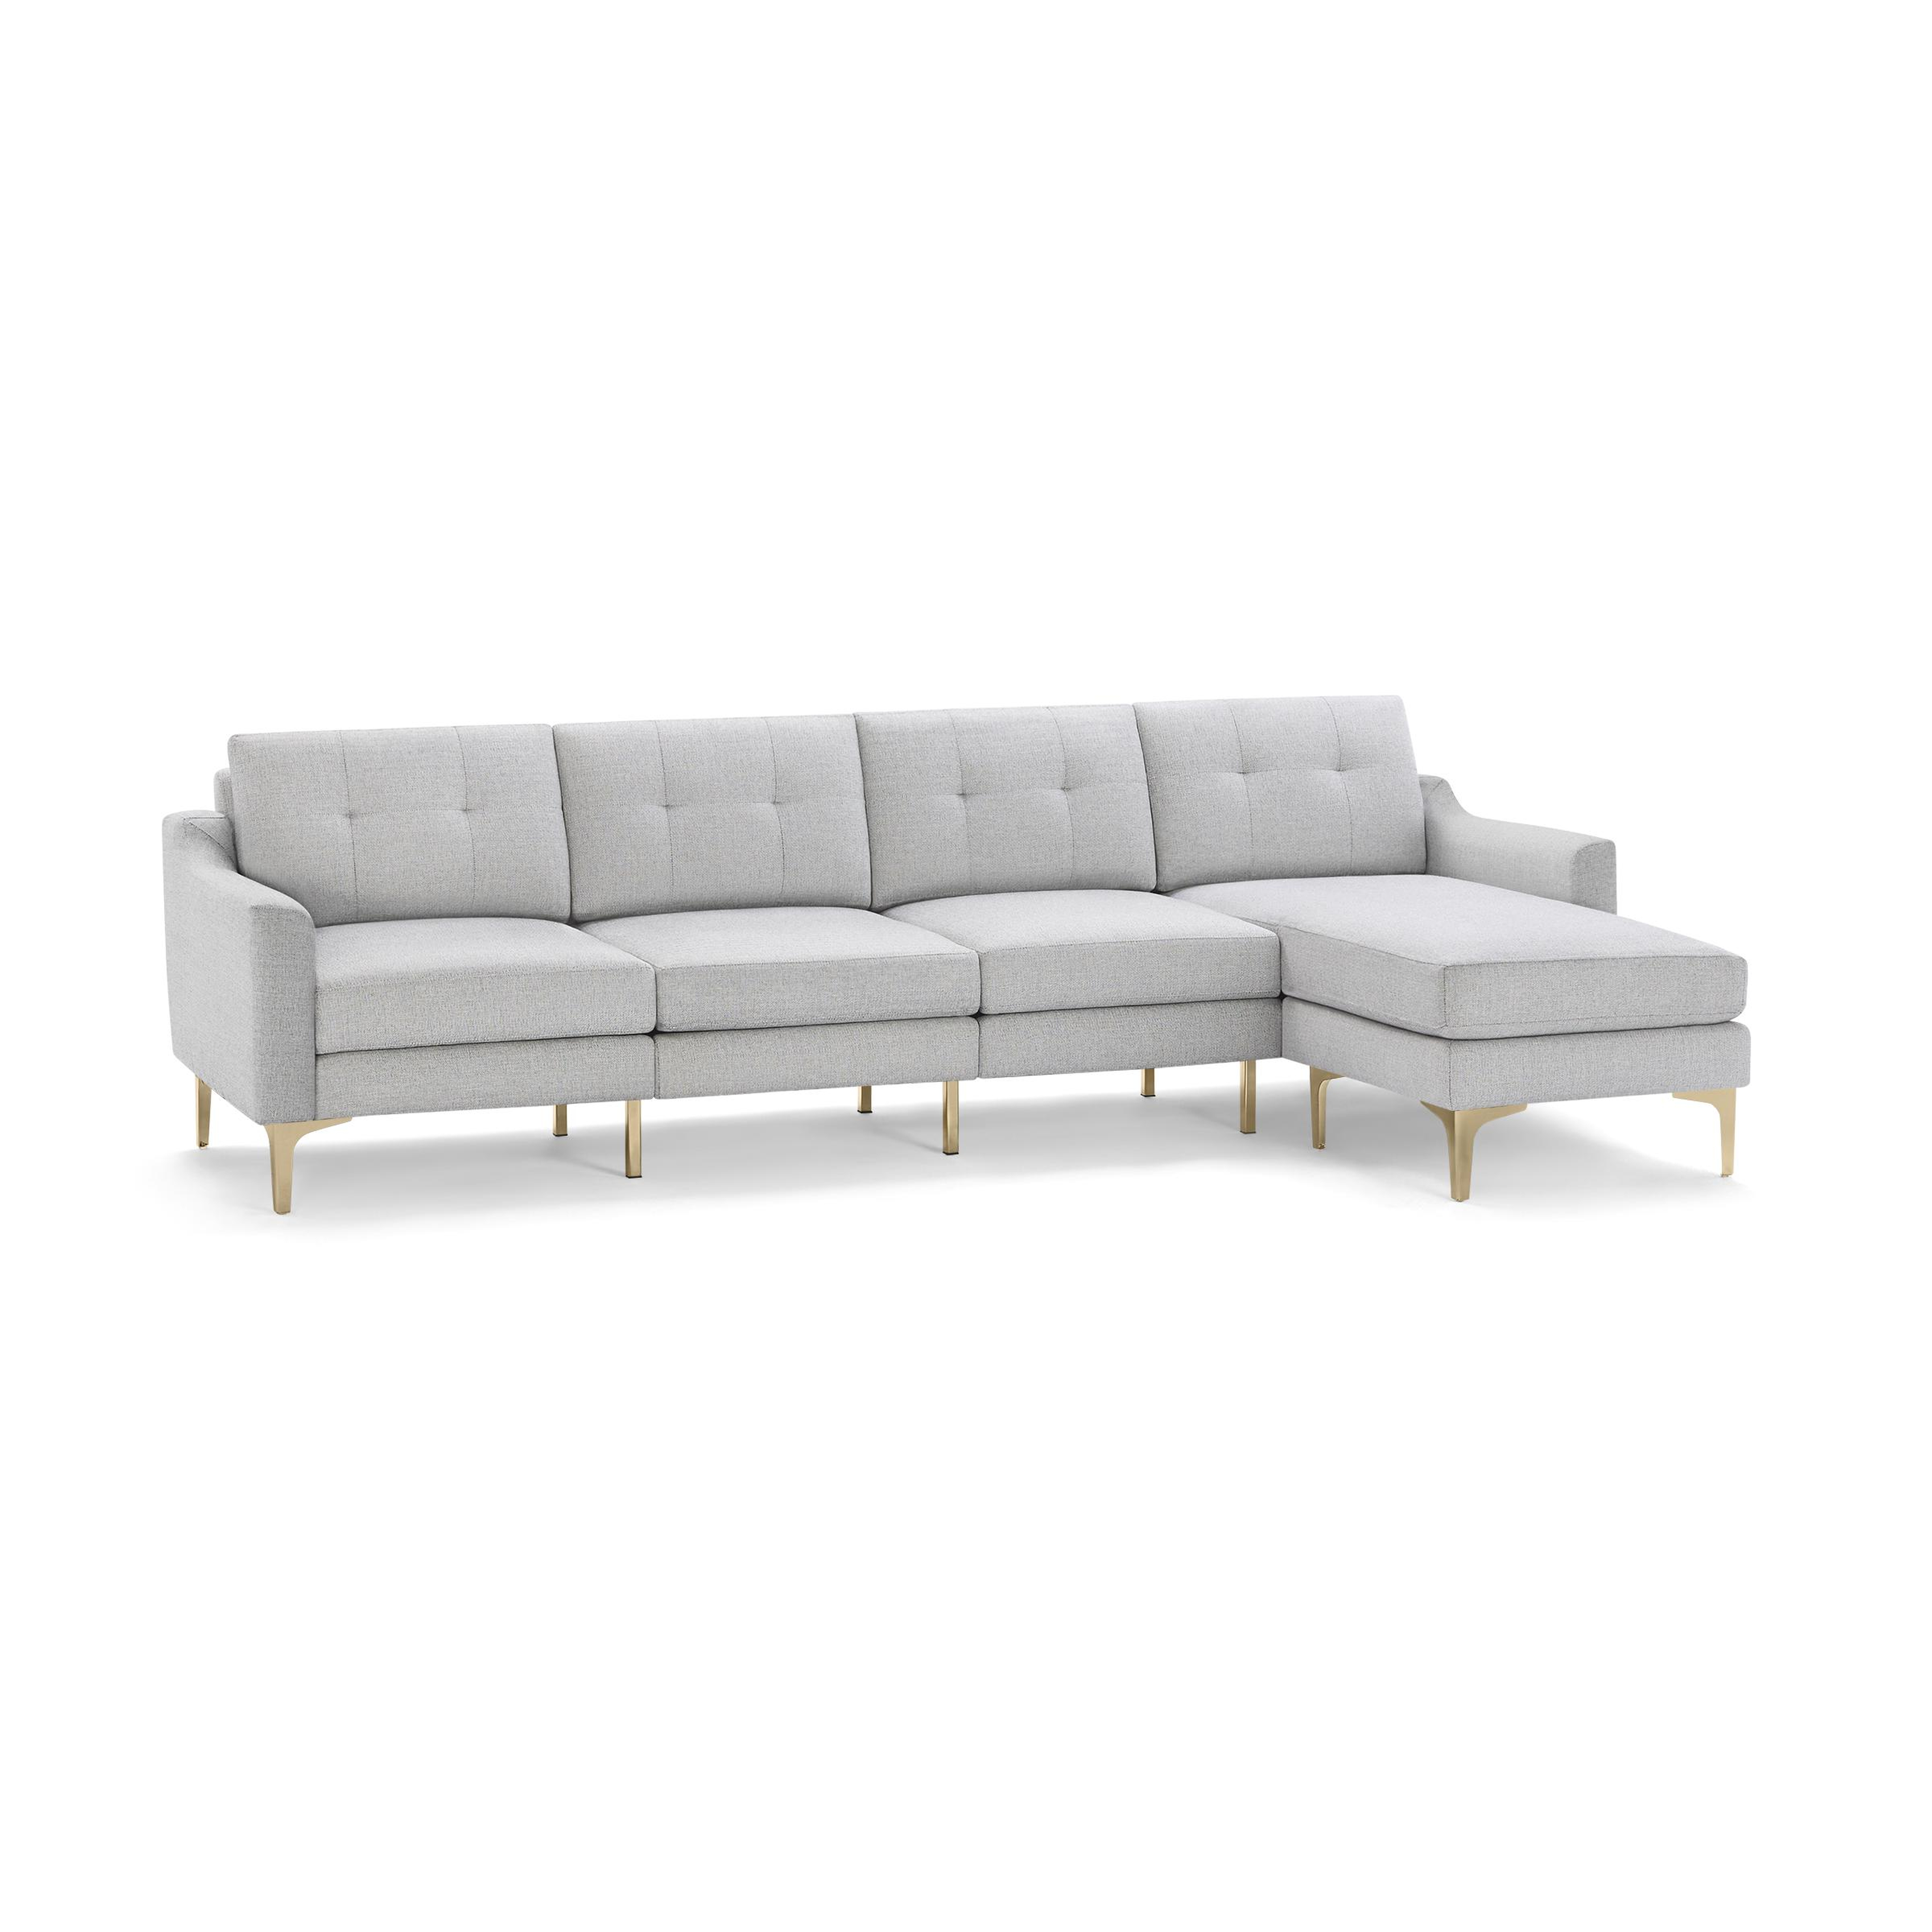 Nomad King Sectional in Crushed Gravel, Brass Legs - Burrow